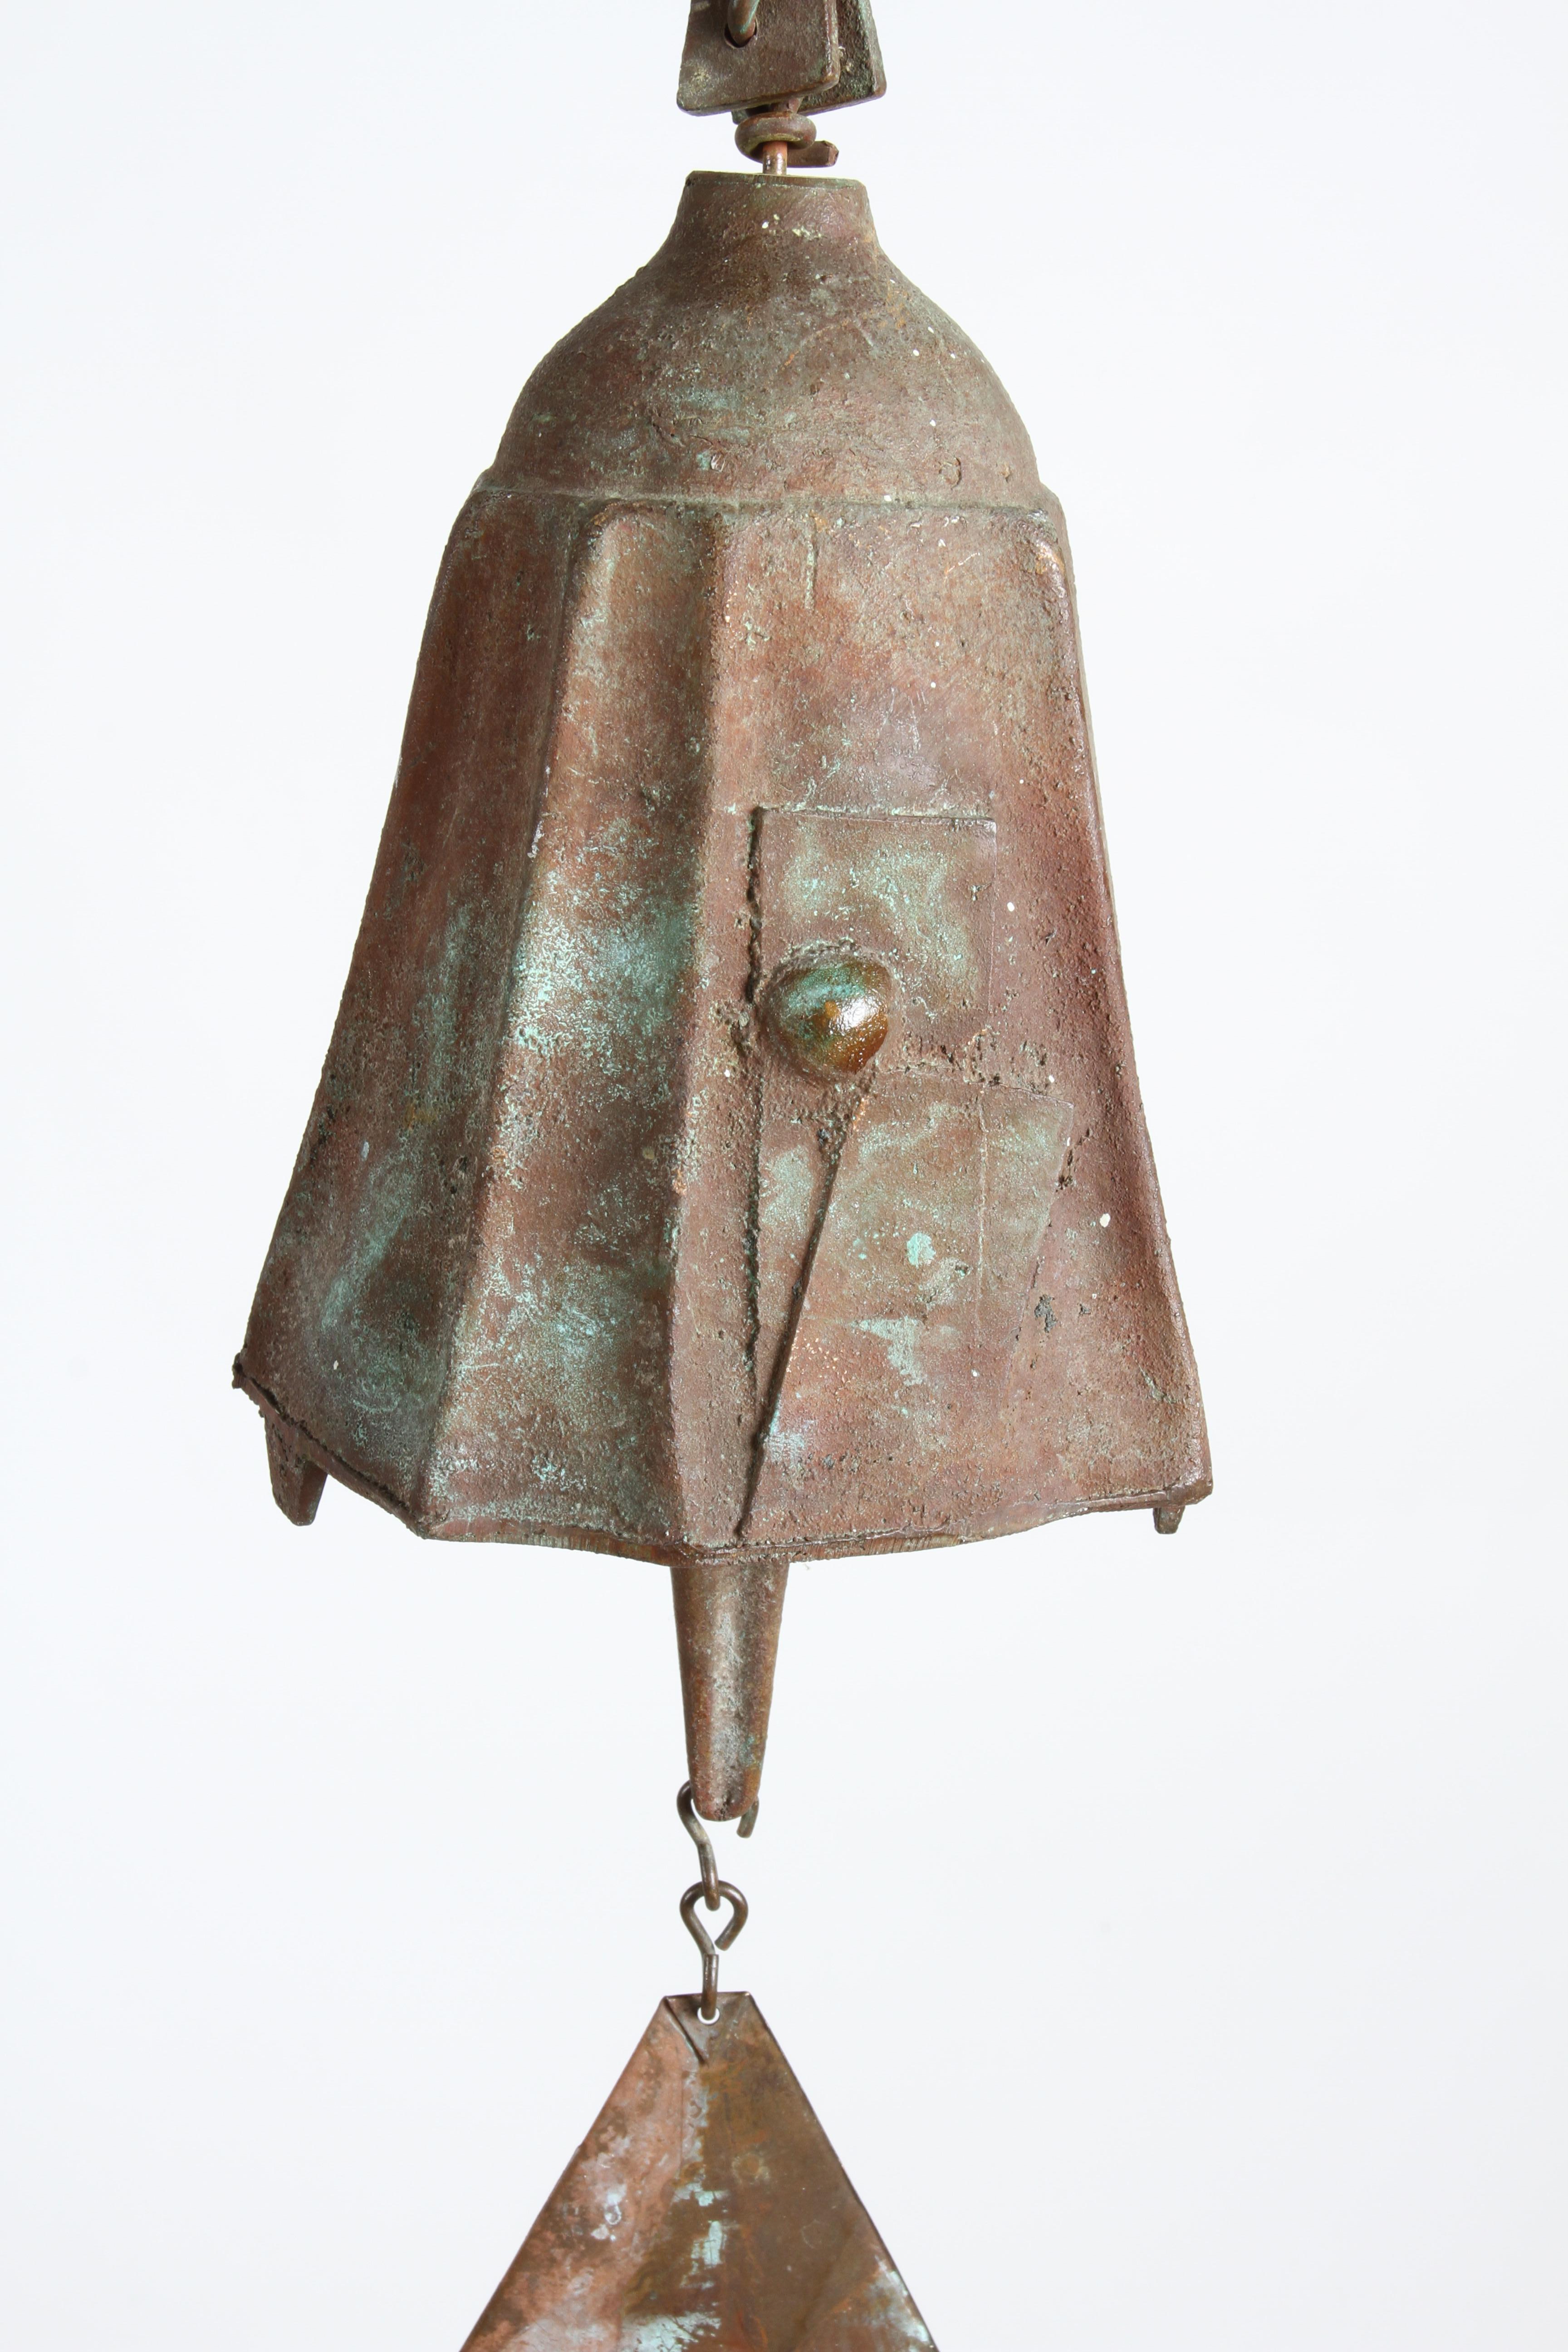 Early medium scale cast bronze sculptural wind chime or bell with patina by Italian-born visionary architect and artist, Paolo Soleri. This piece was made by the artist at his Cosanti studio in Arizona. Bell is 6.5